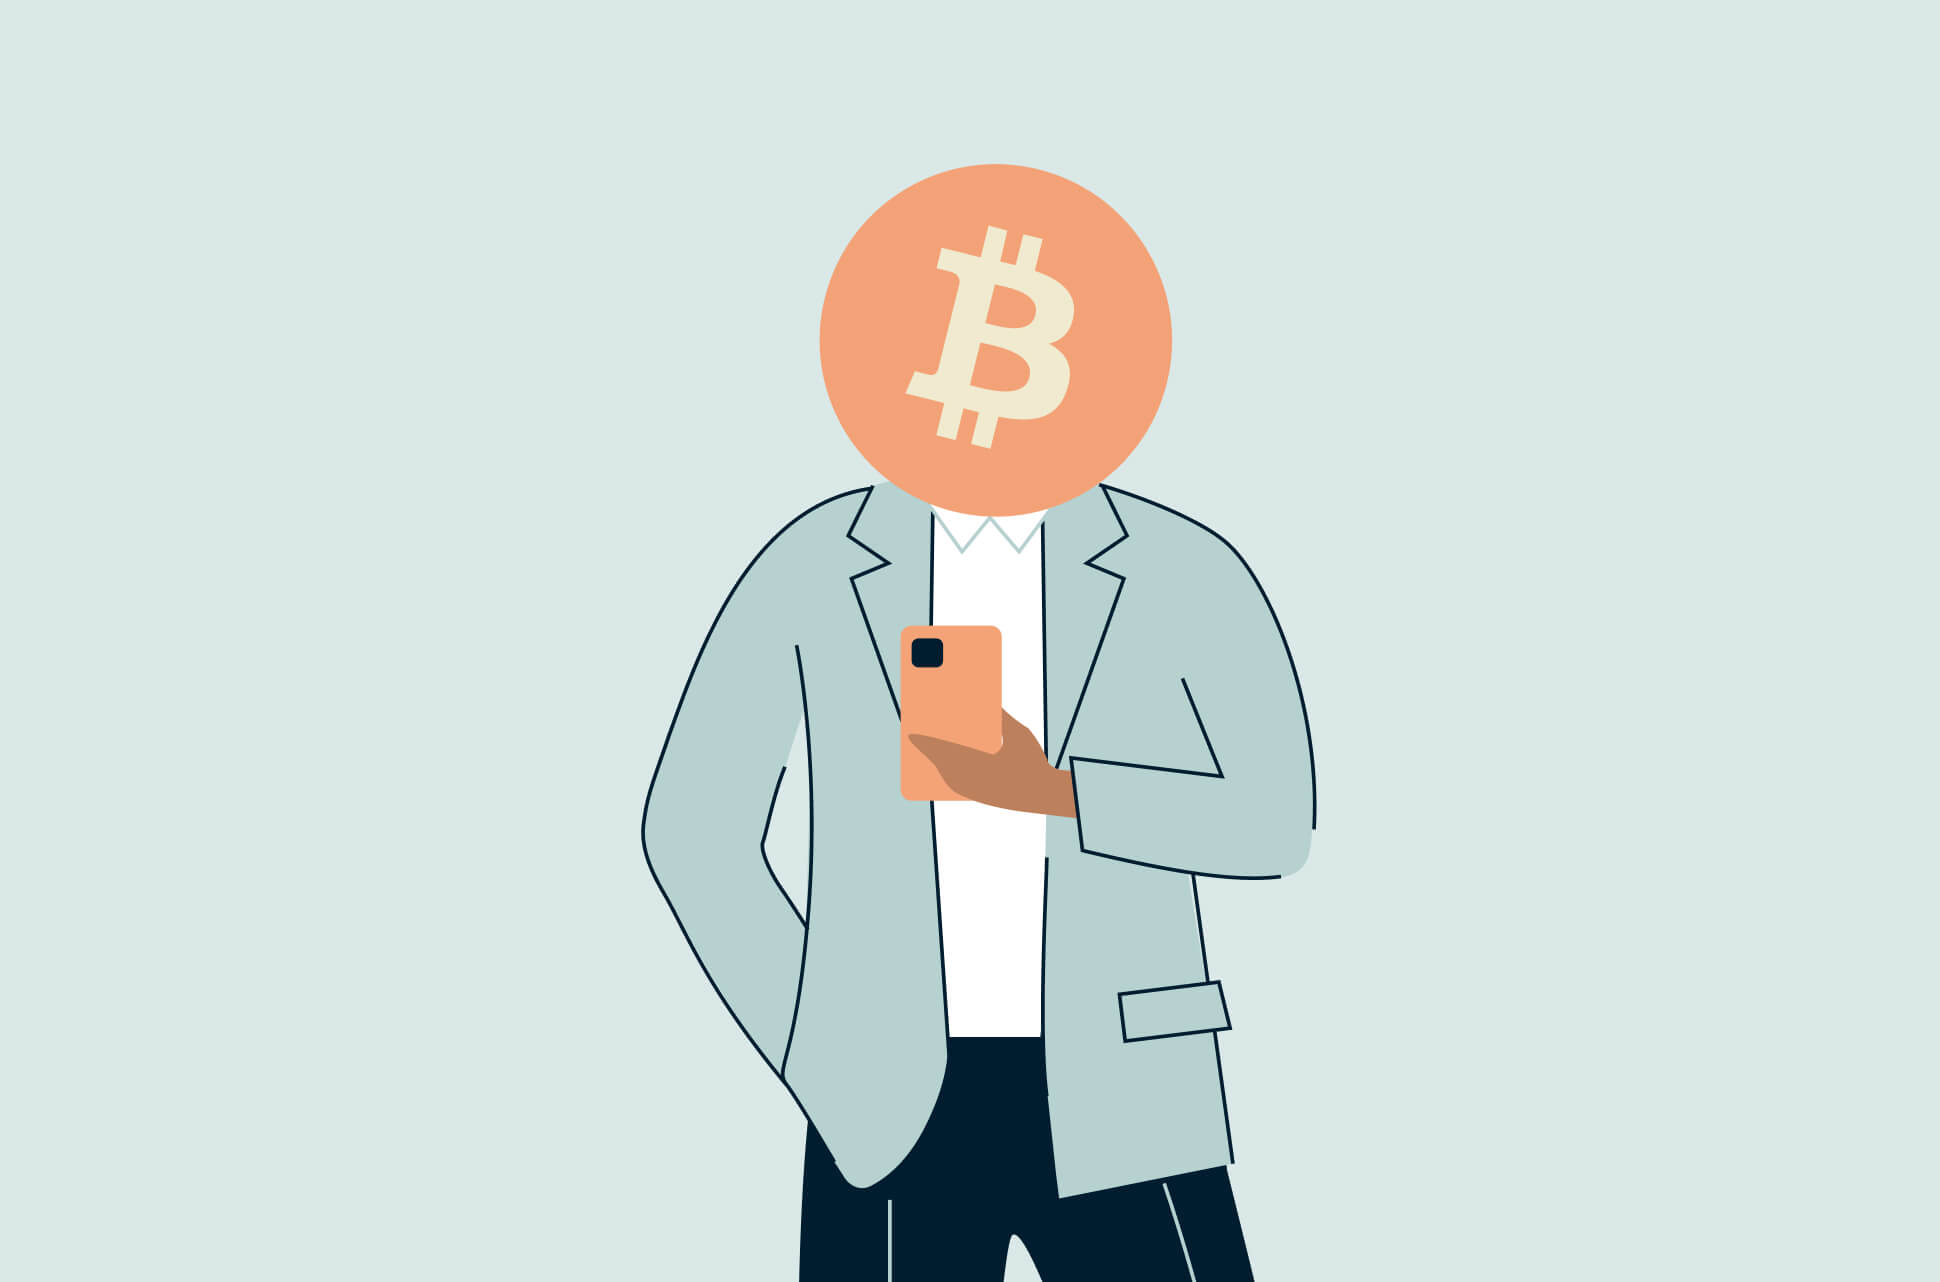 However, there are methods you can employ to enhance your privacy and anonymity when sending Bitcoin. These methods include using mixers or tumblers, utilizing VPNs and Tor networks, and creating a new wallet address for each transaction. Throughout this guide, we will explain each step in detail, ensuring you have a comprehensive understanding of how to send Bitcoin anonymously.